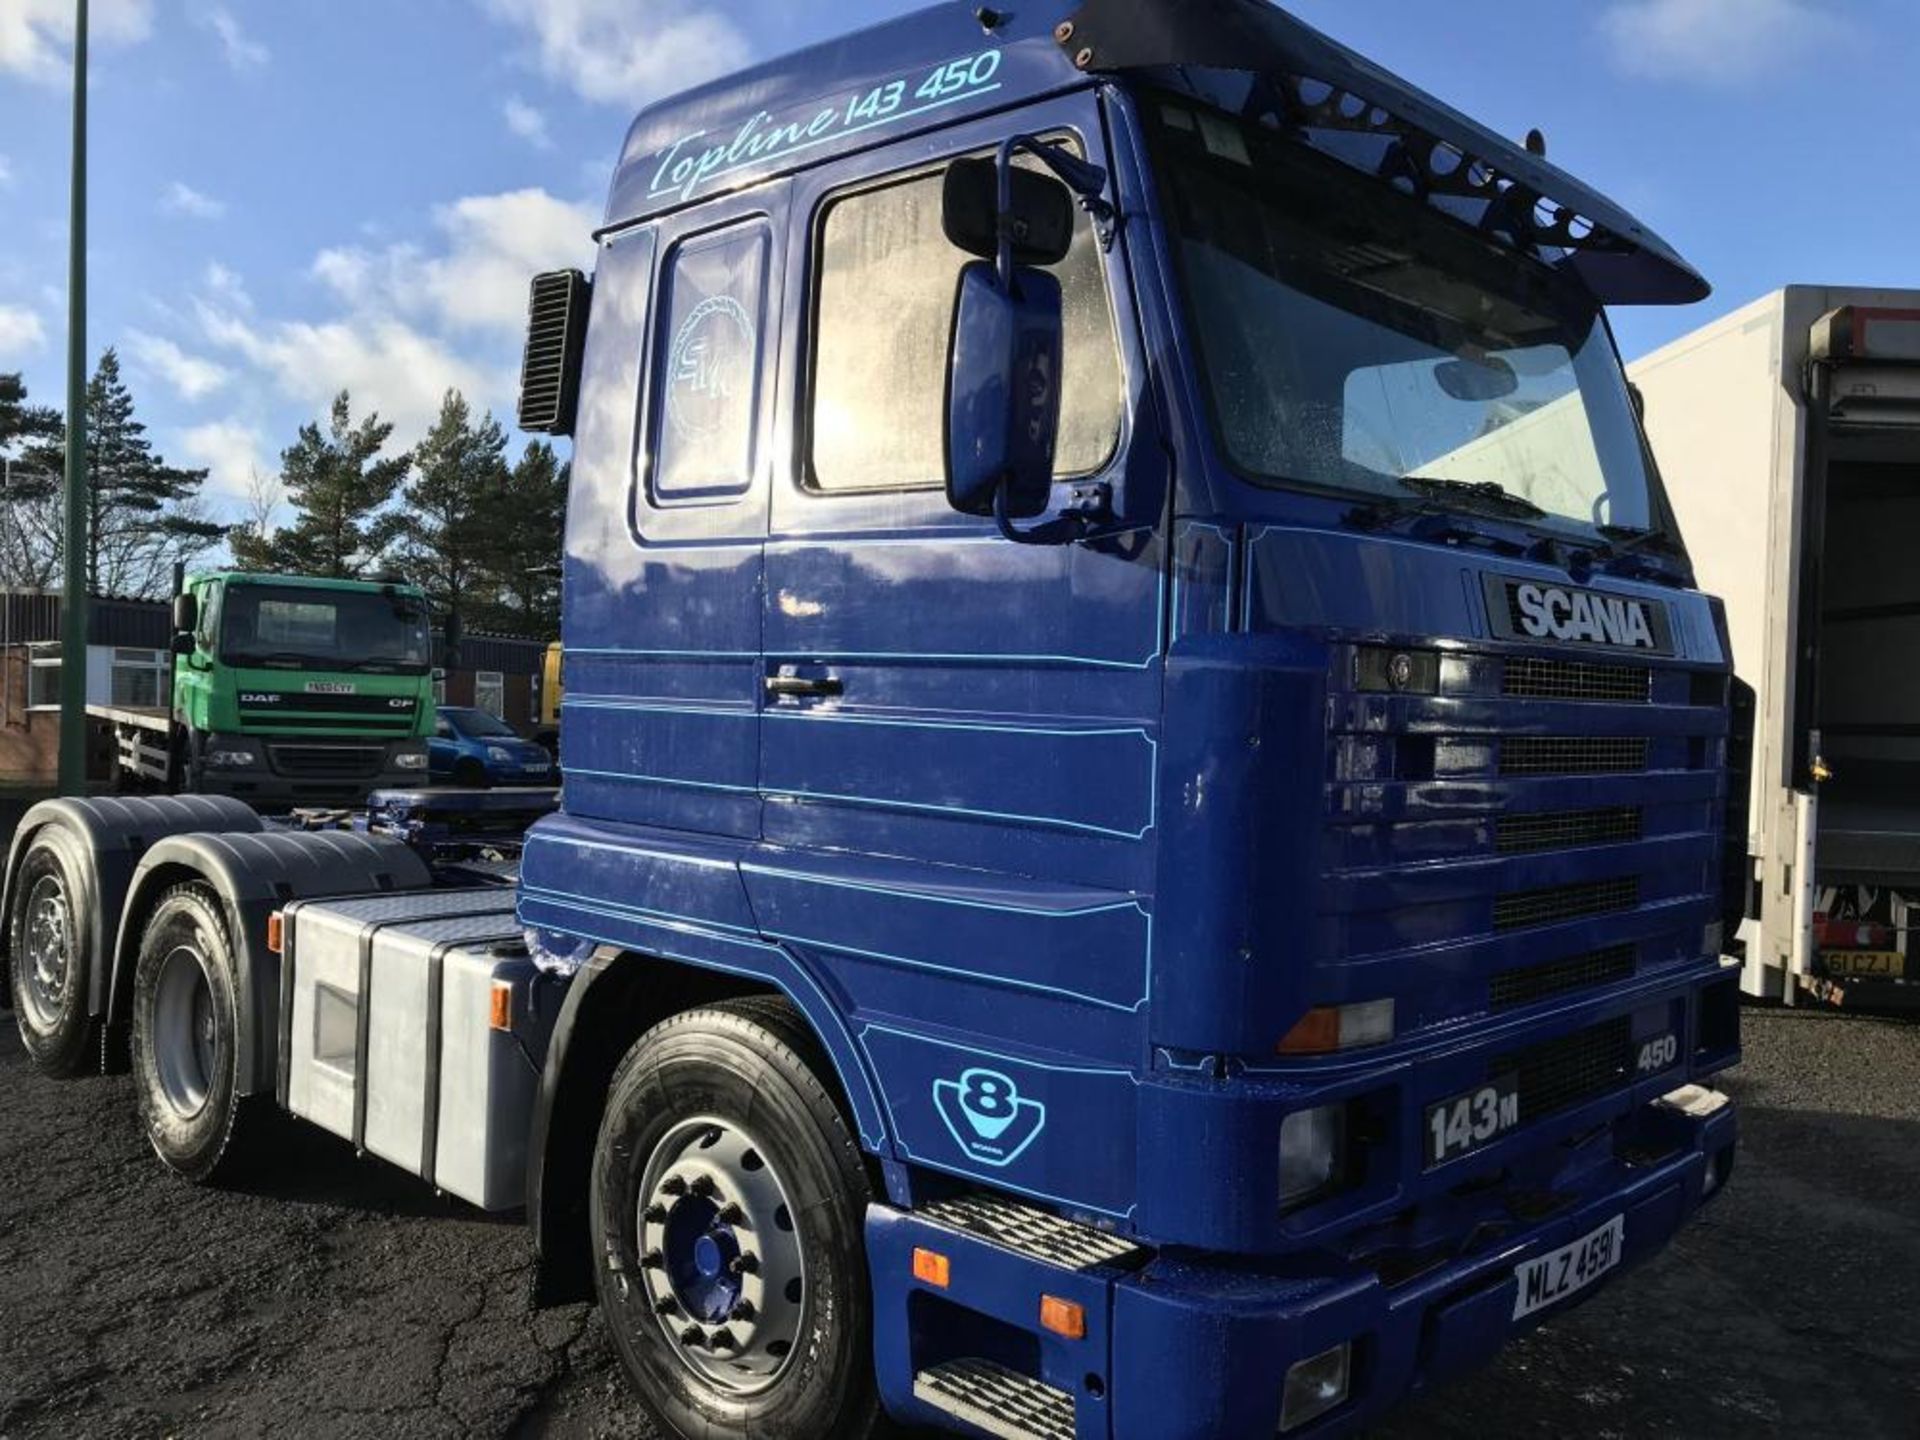 1996 SCANIA 143 450 TAG AXLE TOP LINE STREAM LINE 6X2 TRACTOR UNIT V8 GRS 900 GEARBOX GOOD RUNNER - Image 30 of 31